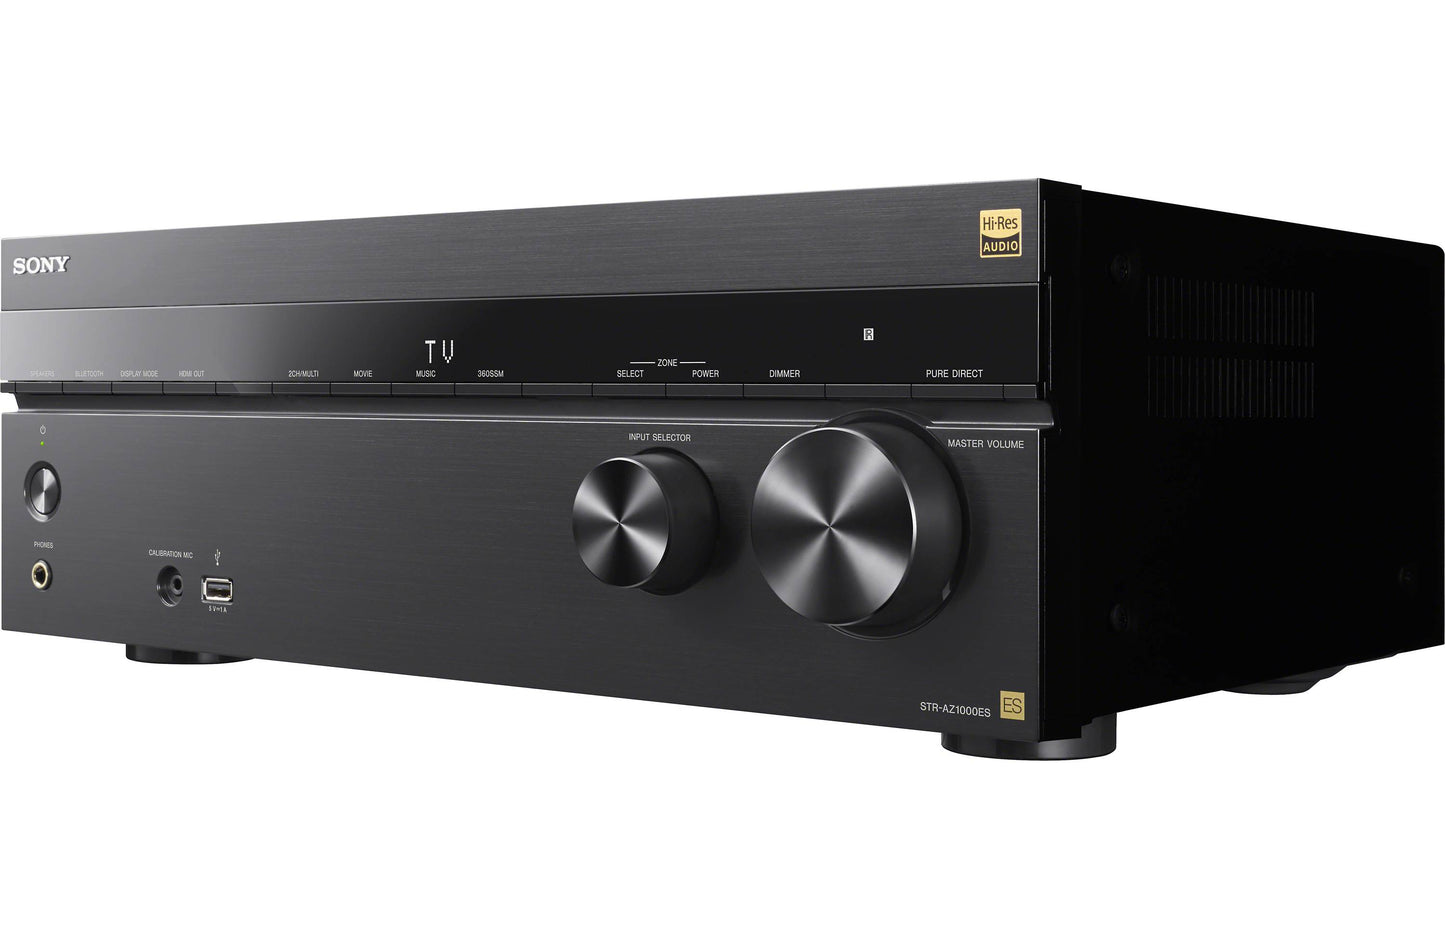 Sony ES STR-AZ1000ES 7.2-Channel Home Theater Receiver with Dolby Atmos